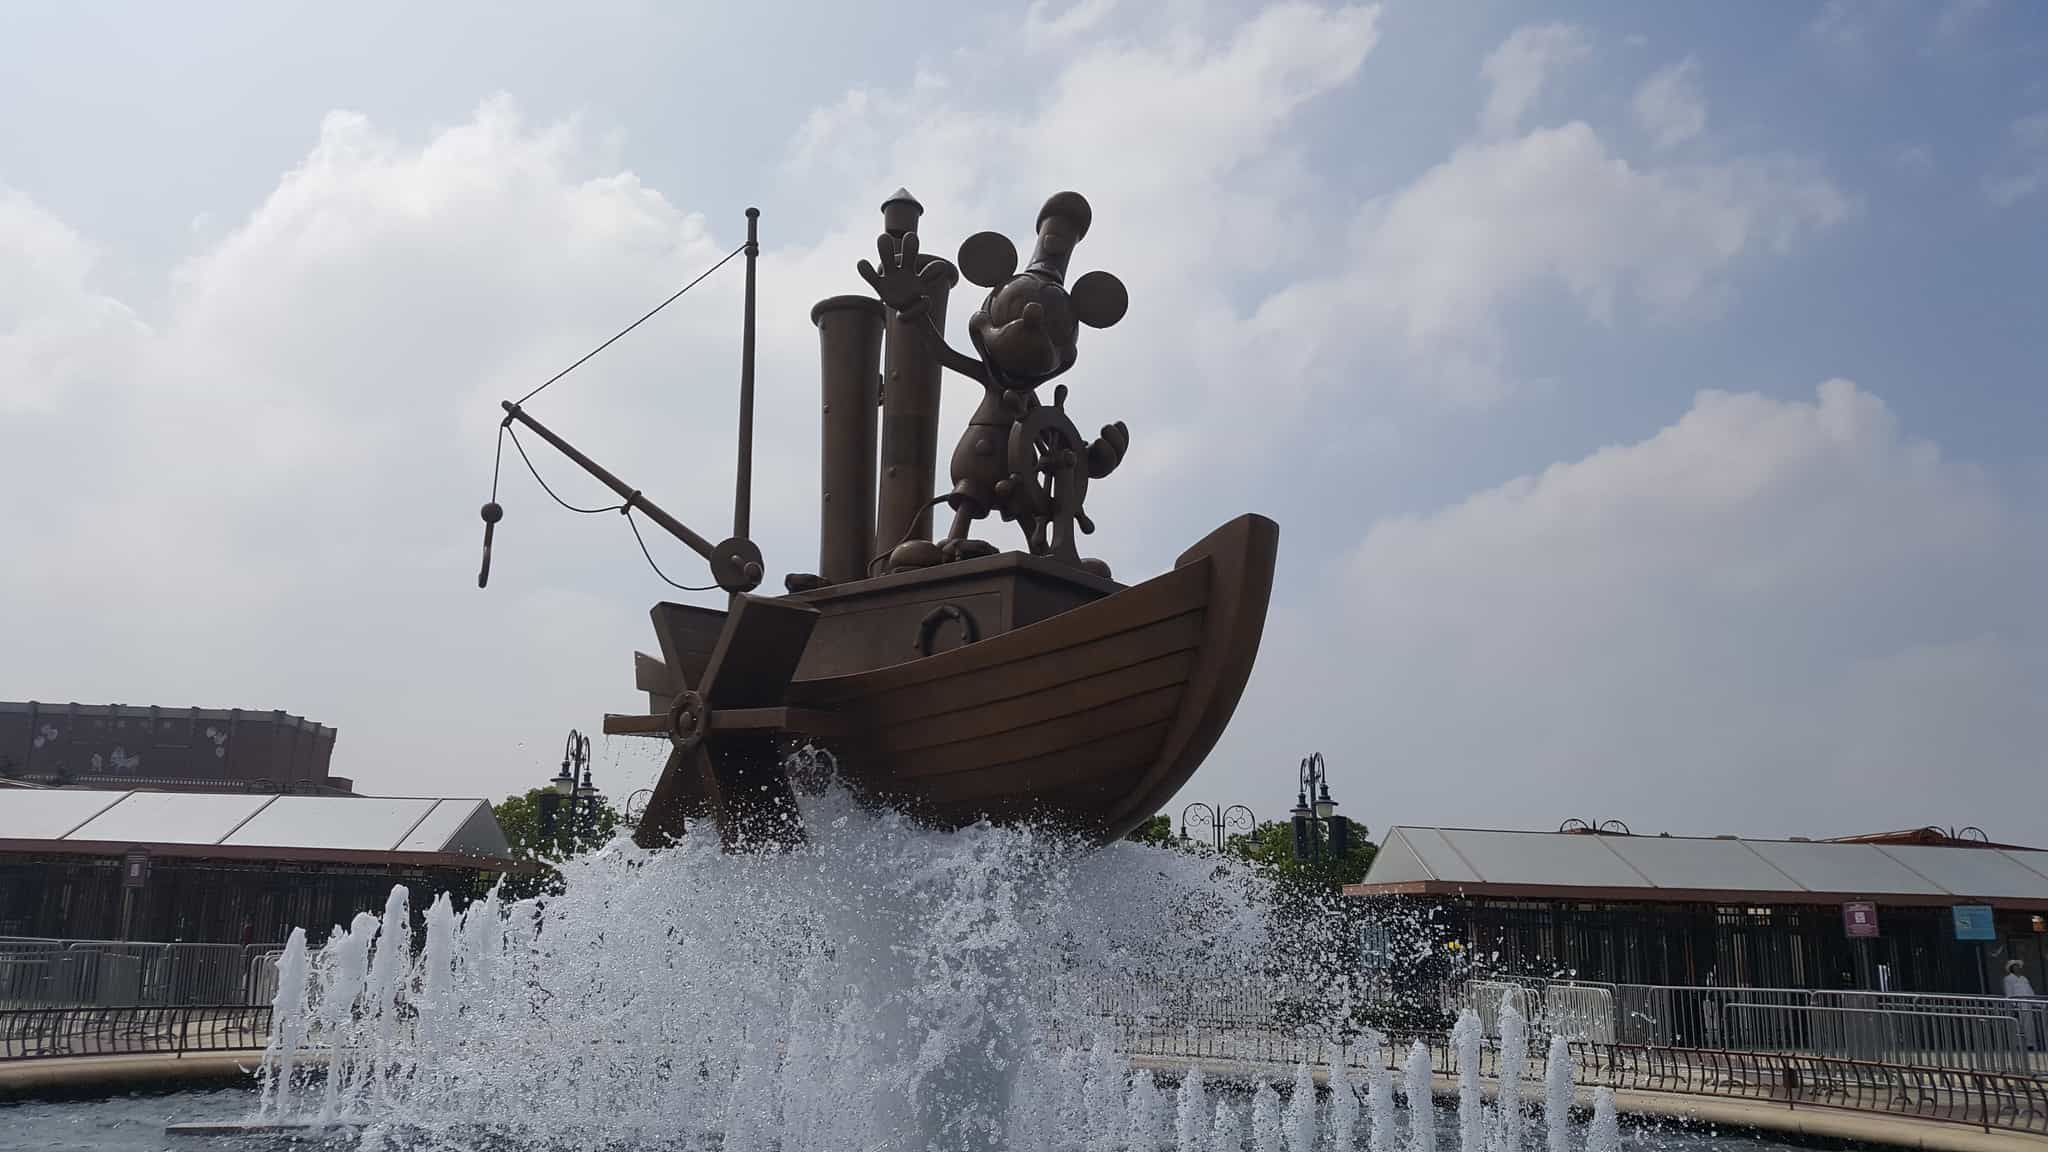 Steamboat Willie Fountain in front of the entrance of Shanghai Disneyland